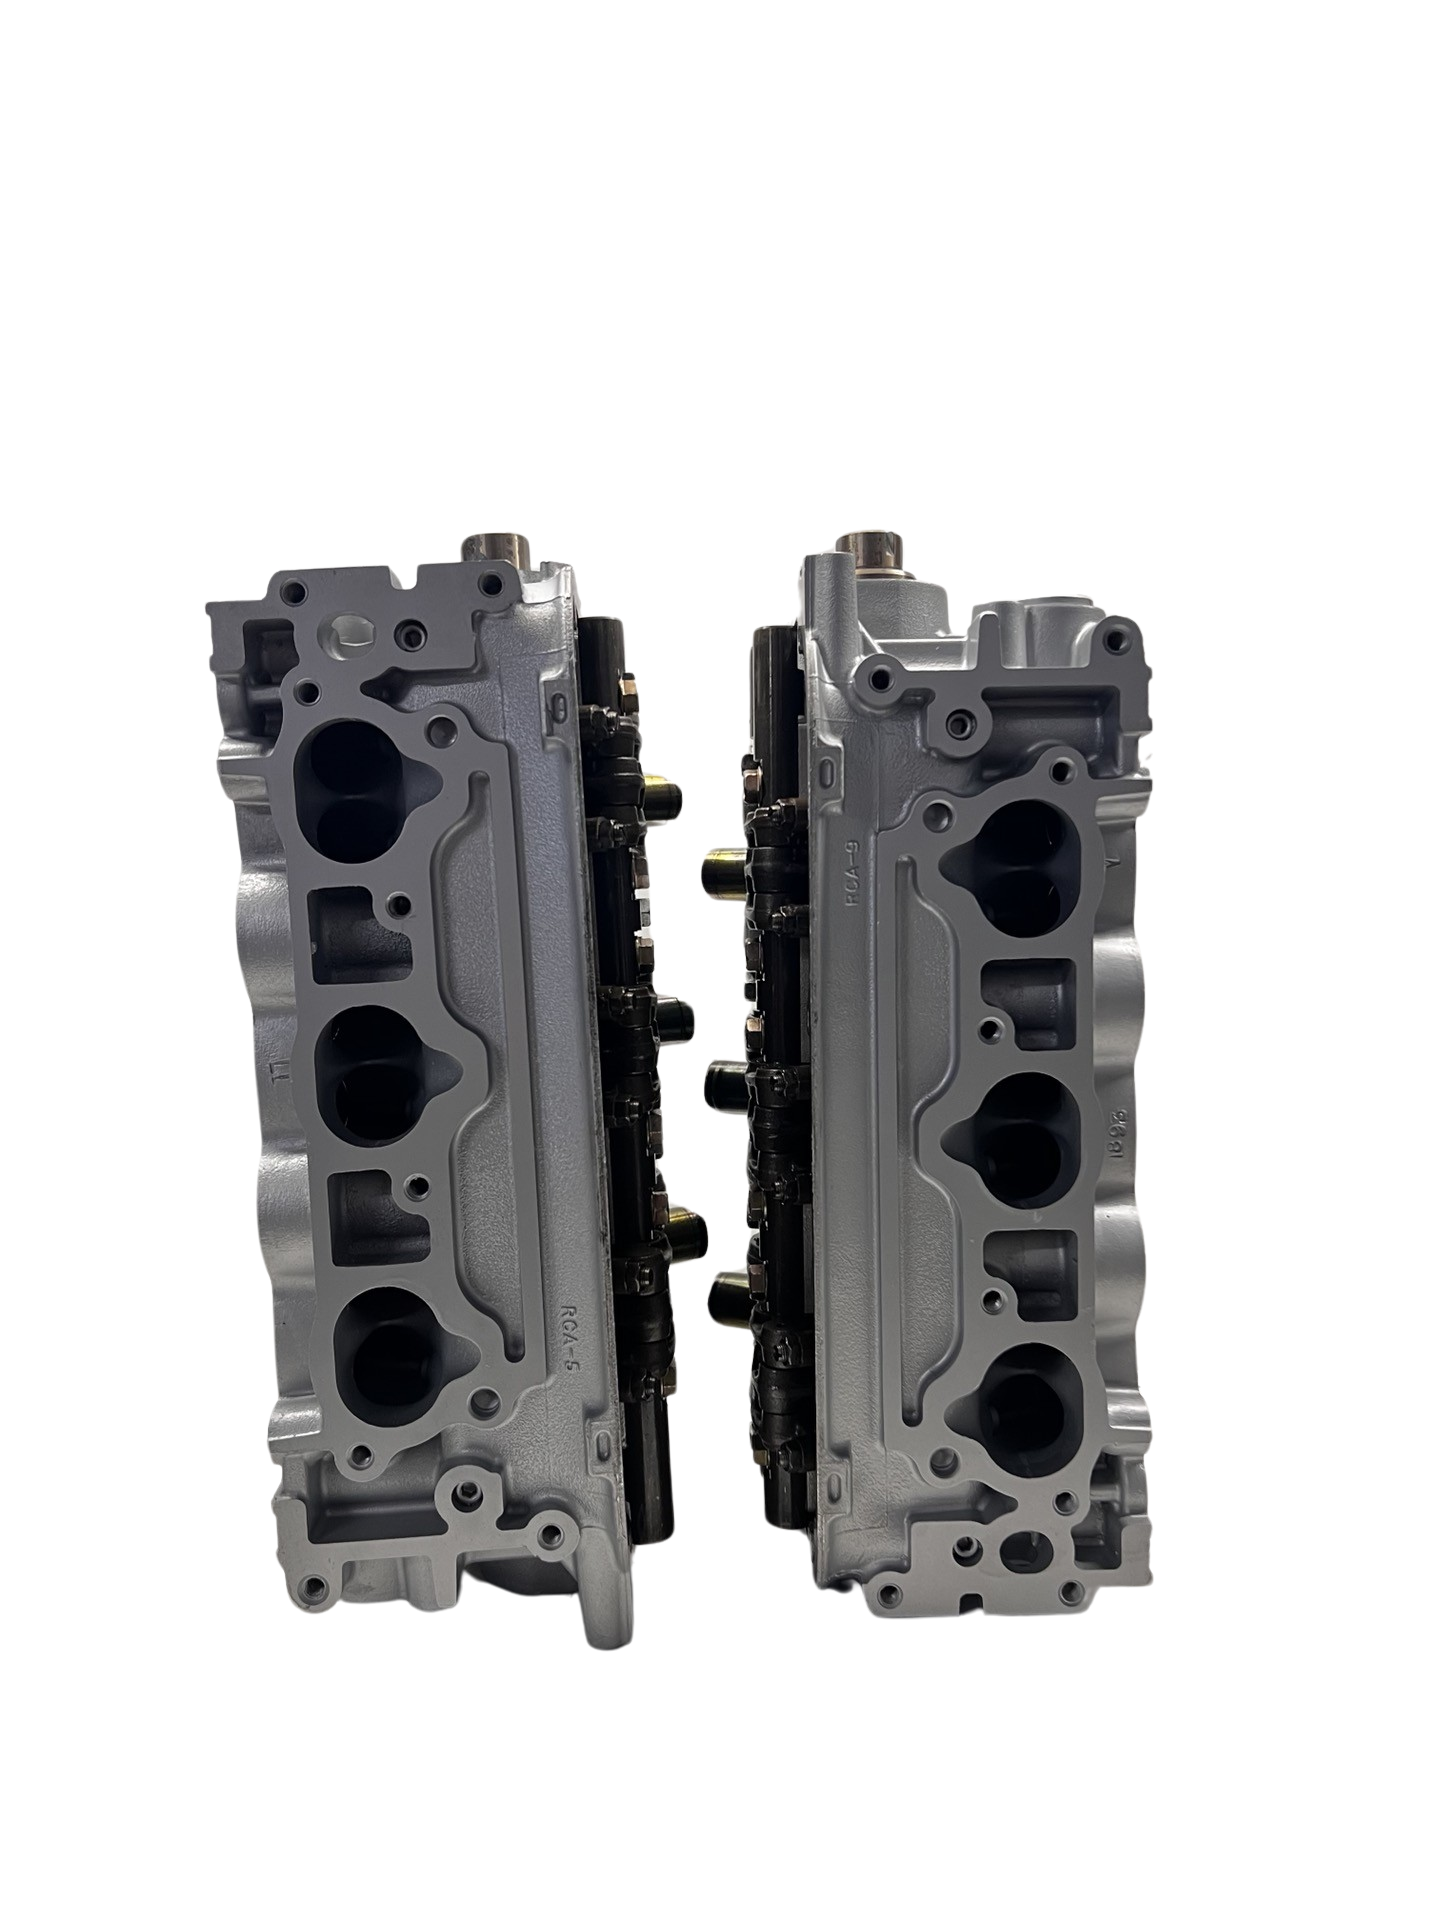 Intake side of cylinder heads for a Honda 3.0L Casting #RCA (SOLD IN PAIR)